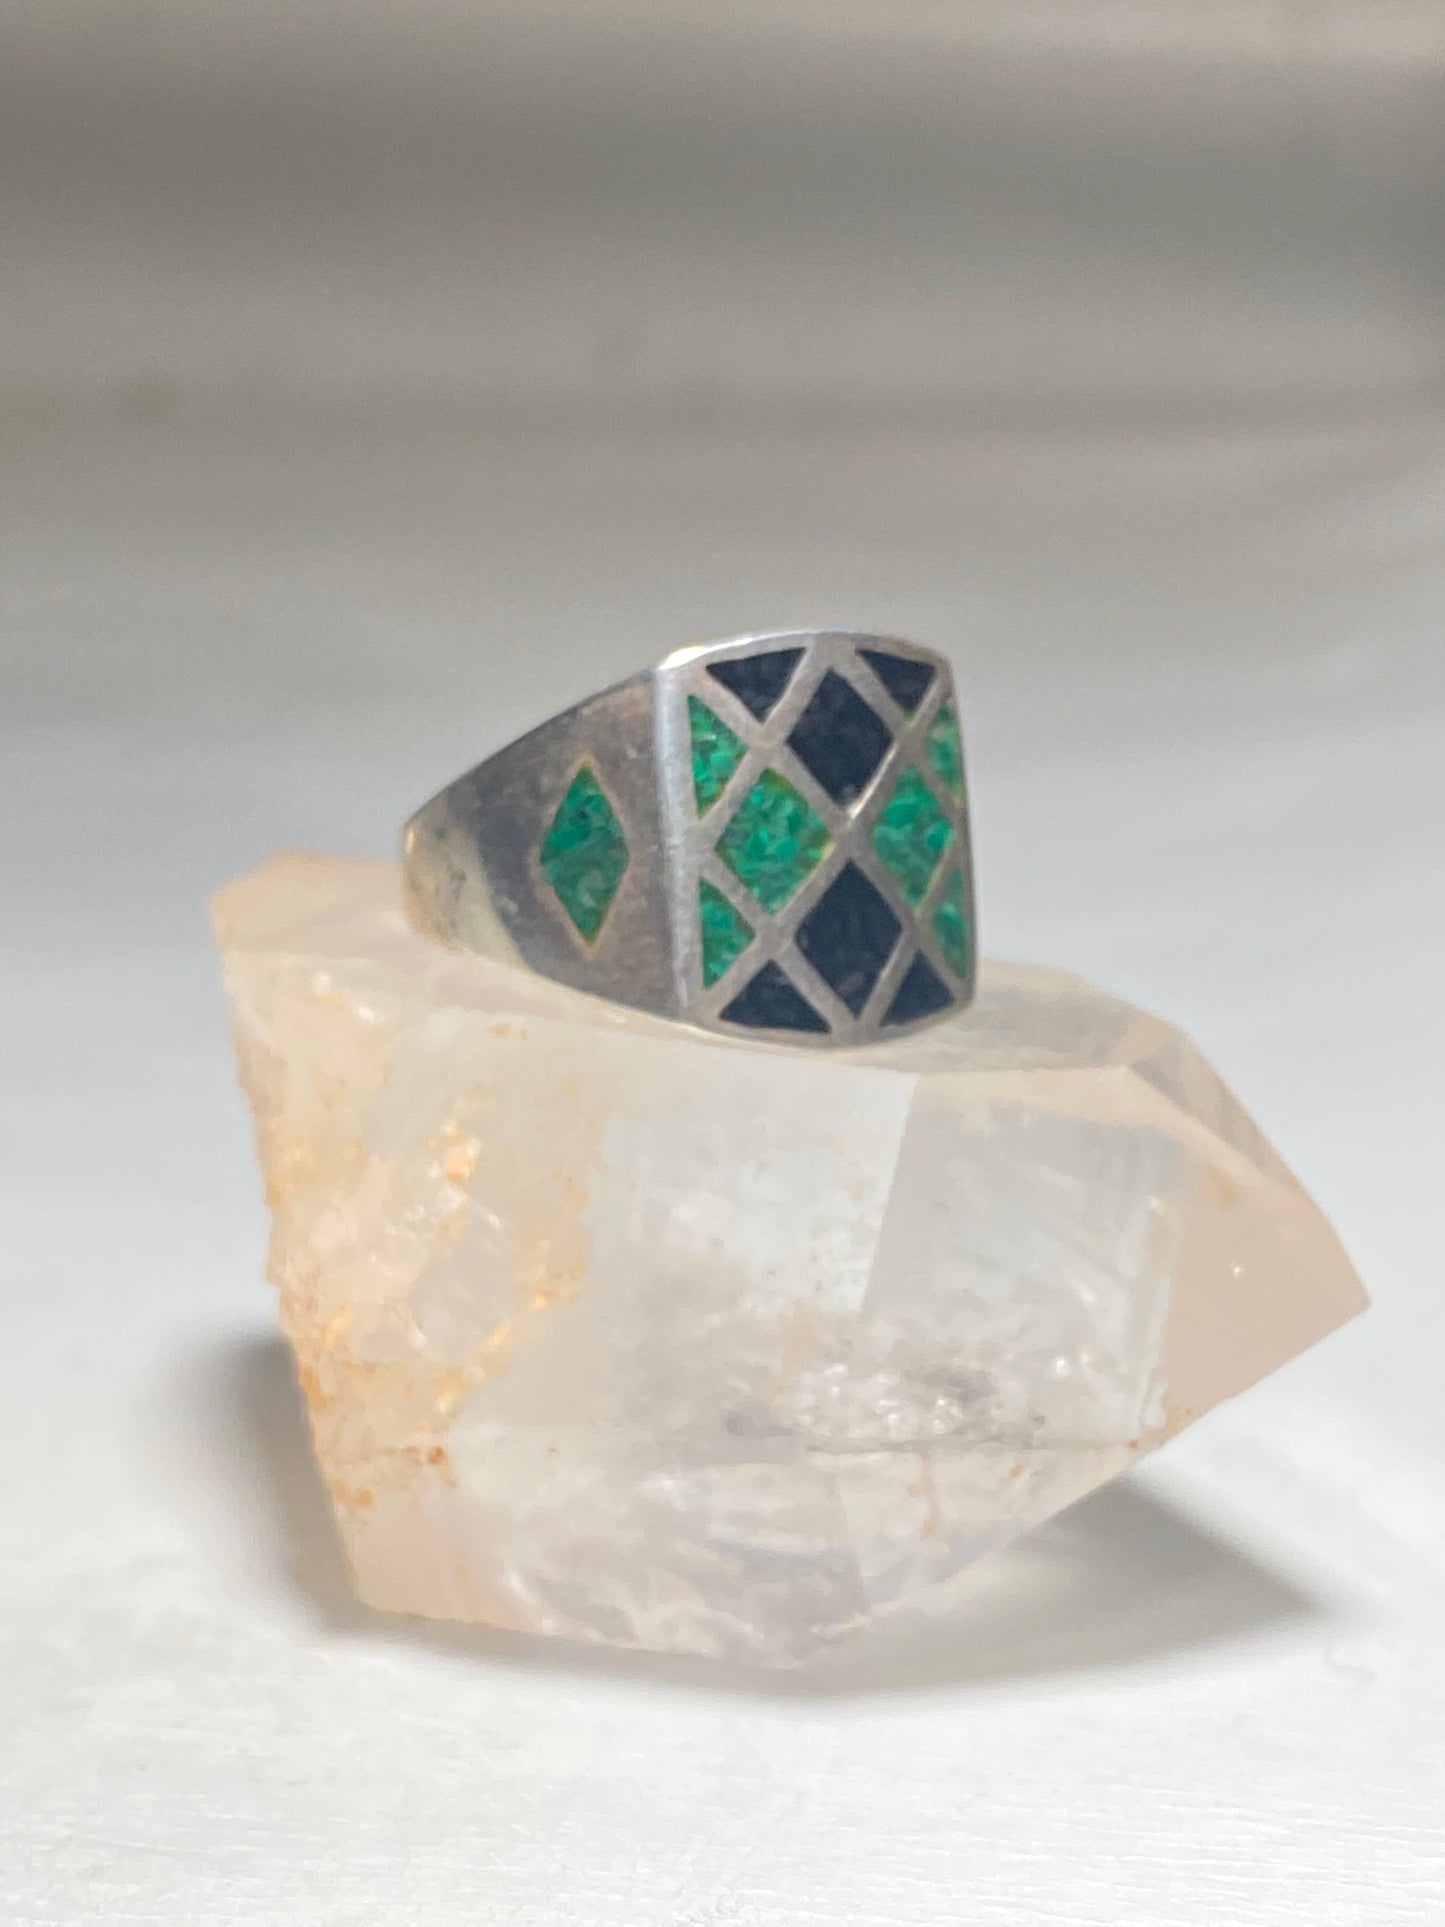 Onyx ring turquoise chips southwest sterling silver women men